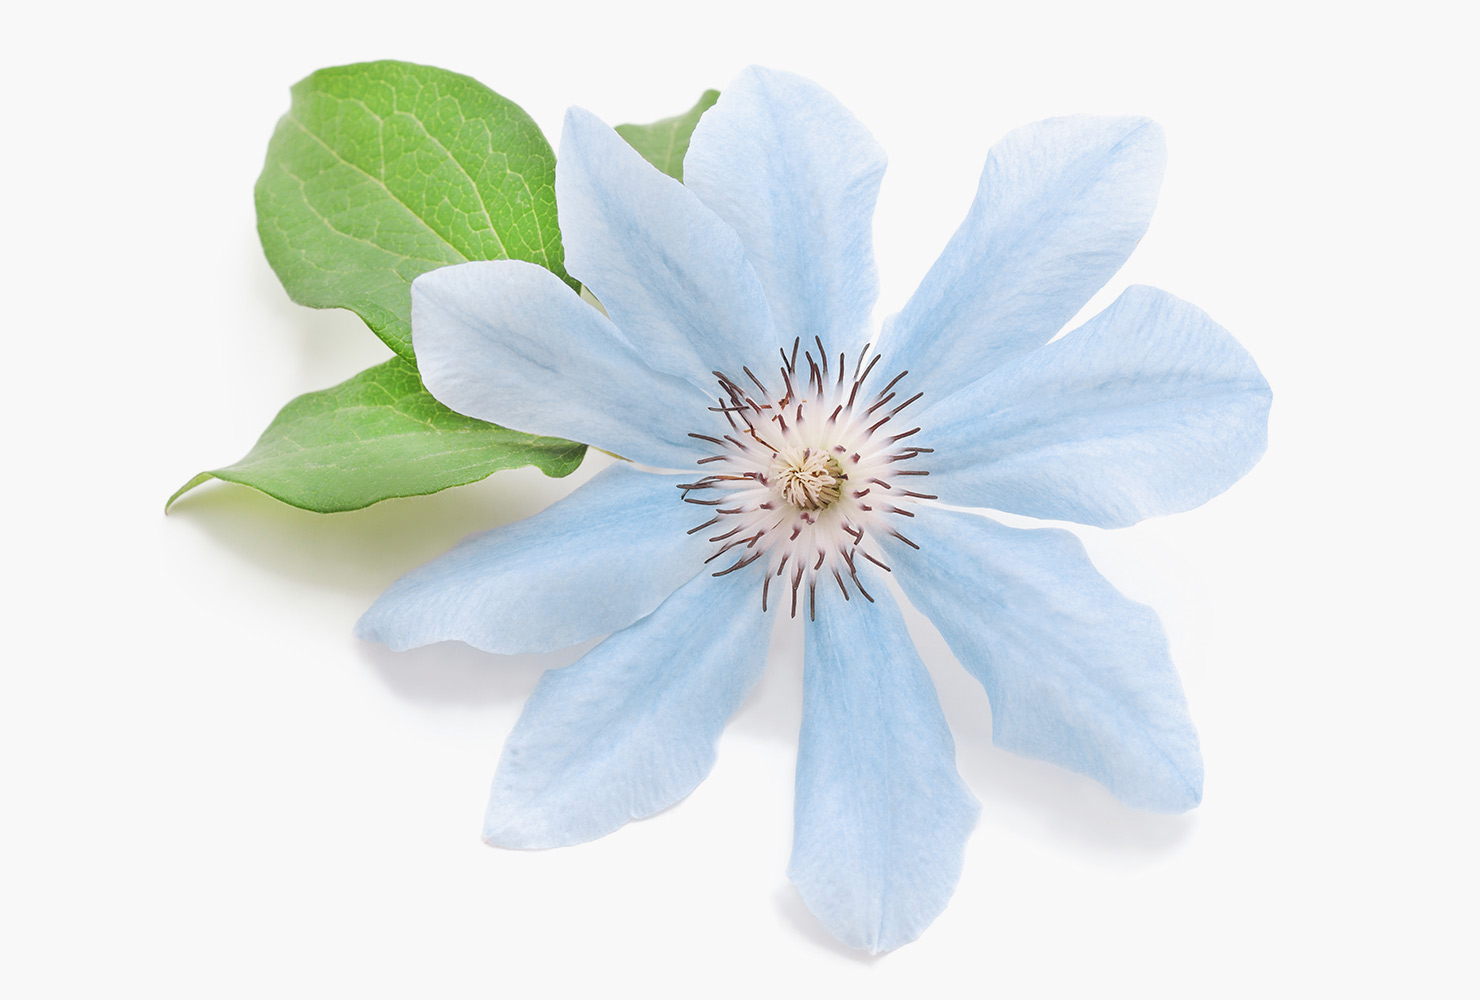 A clematis blue flower with green leaves.